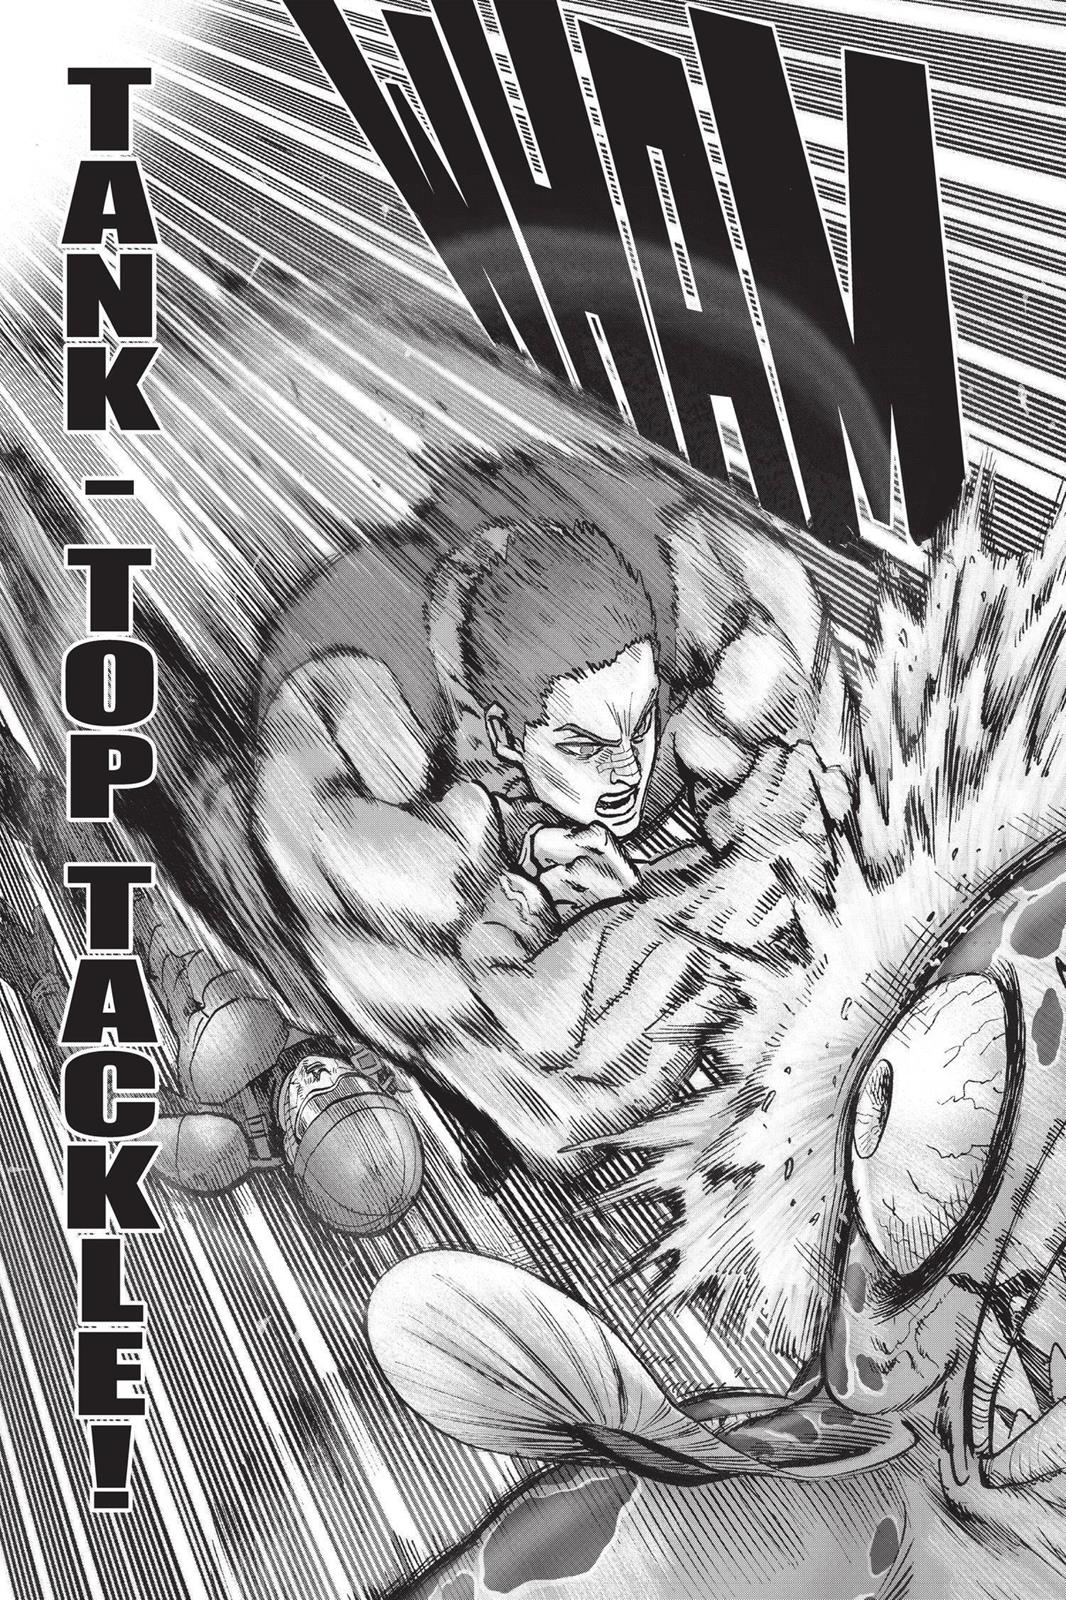 One-Punch Man, Punch 70 image 45